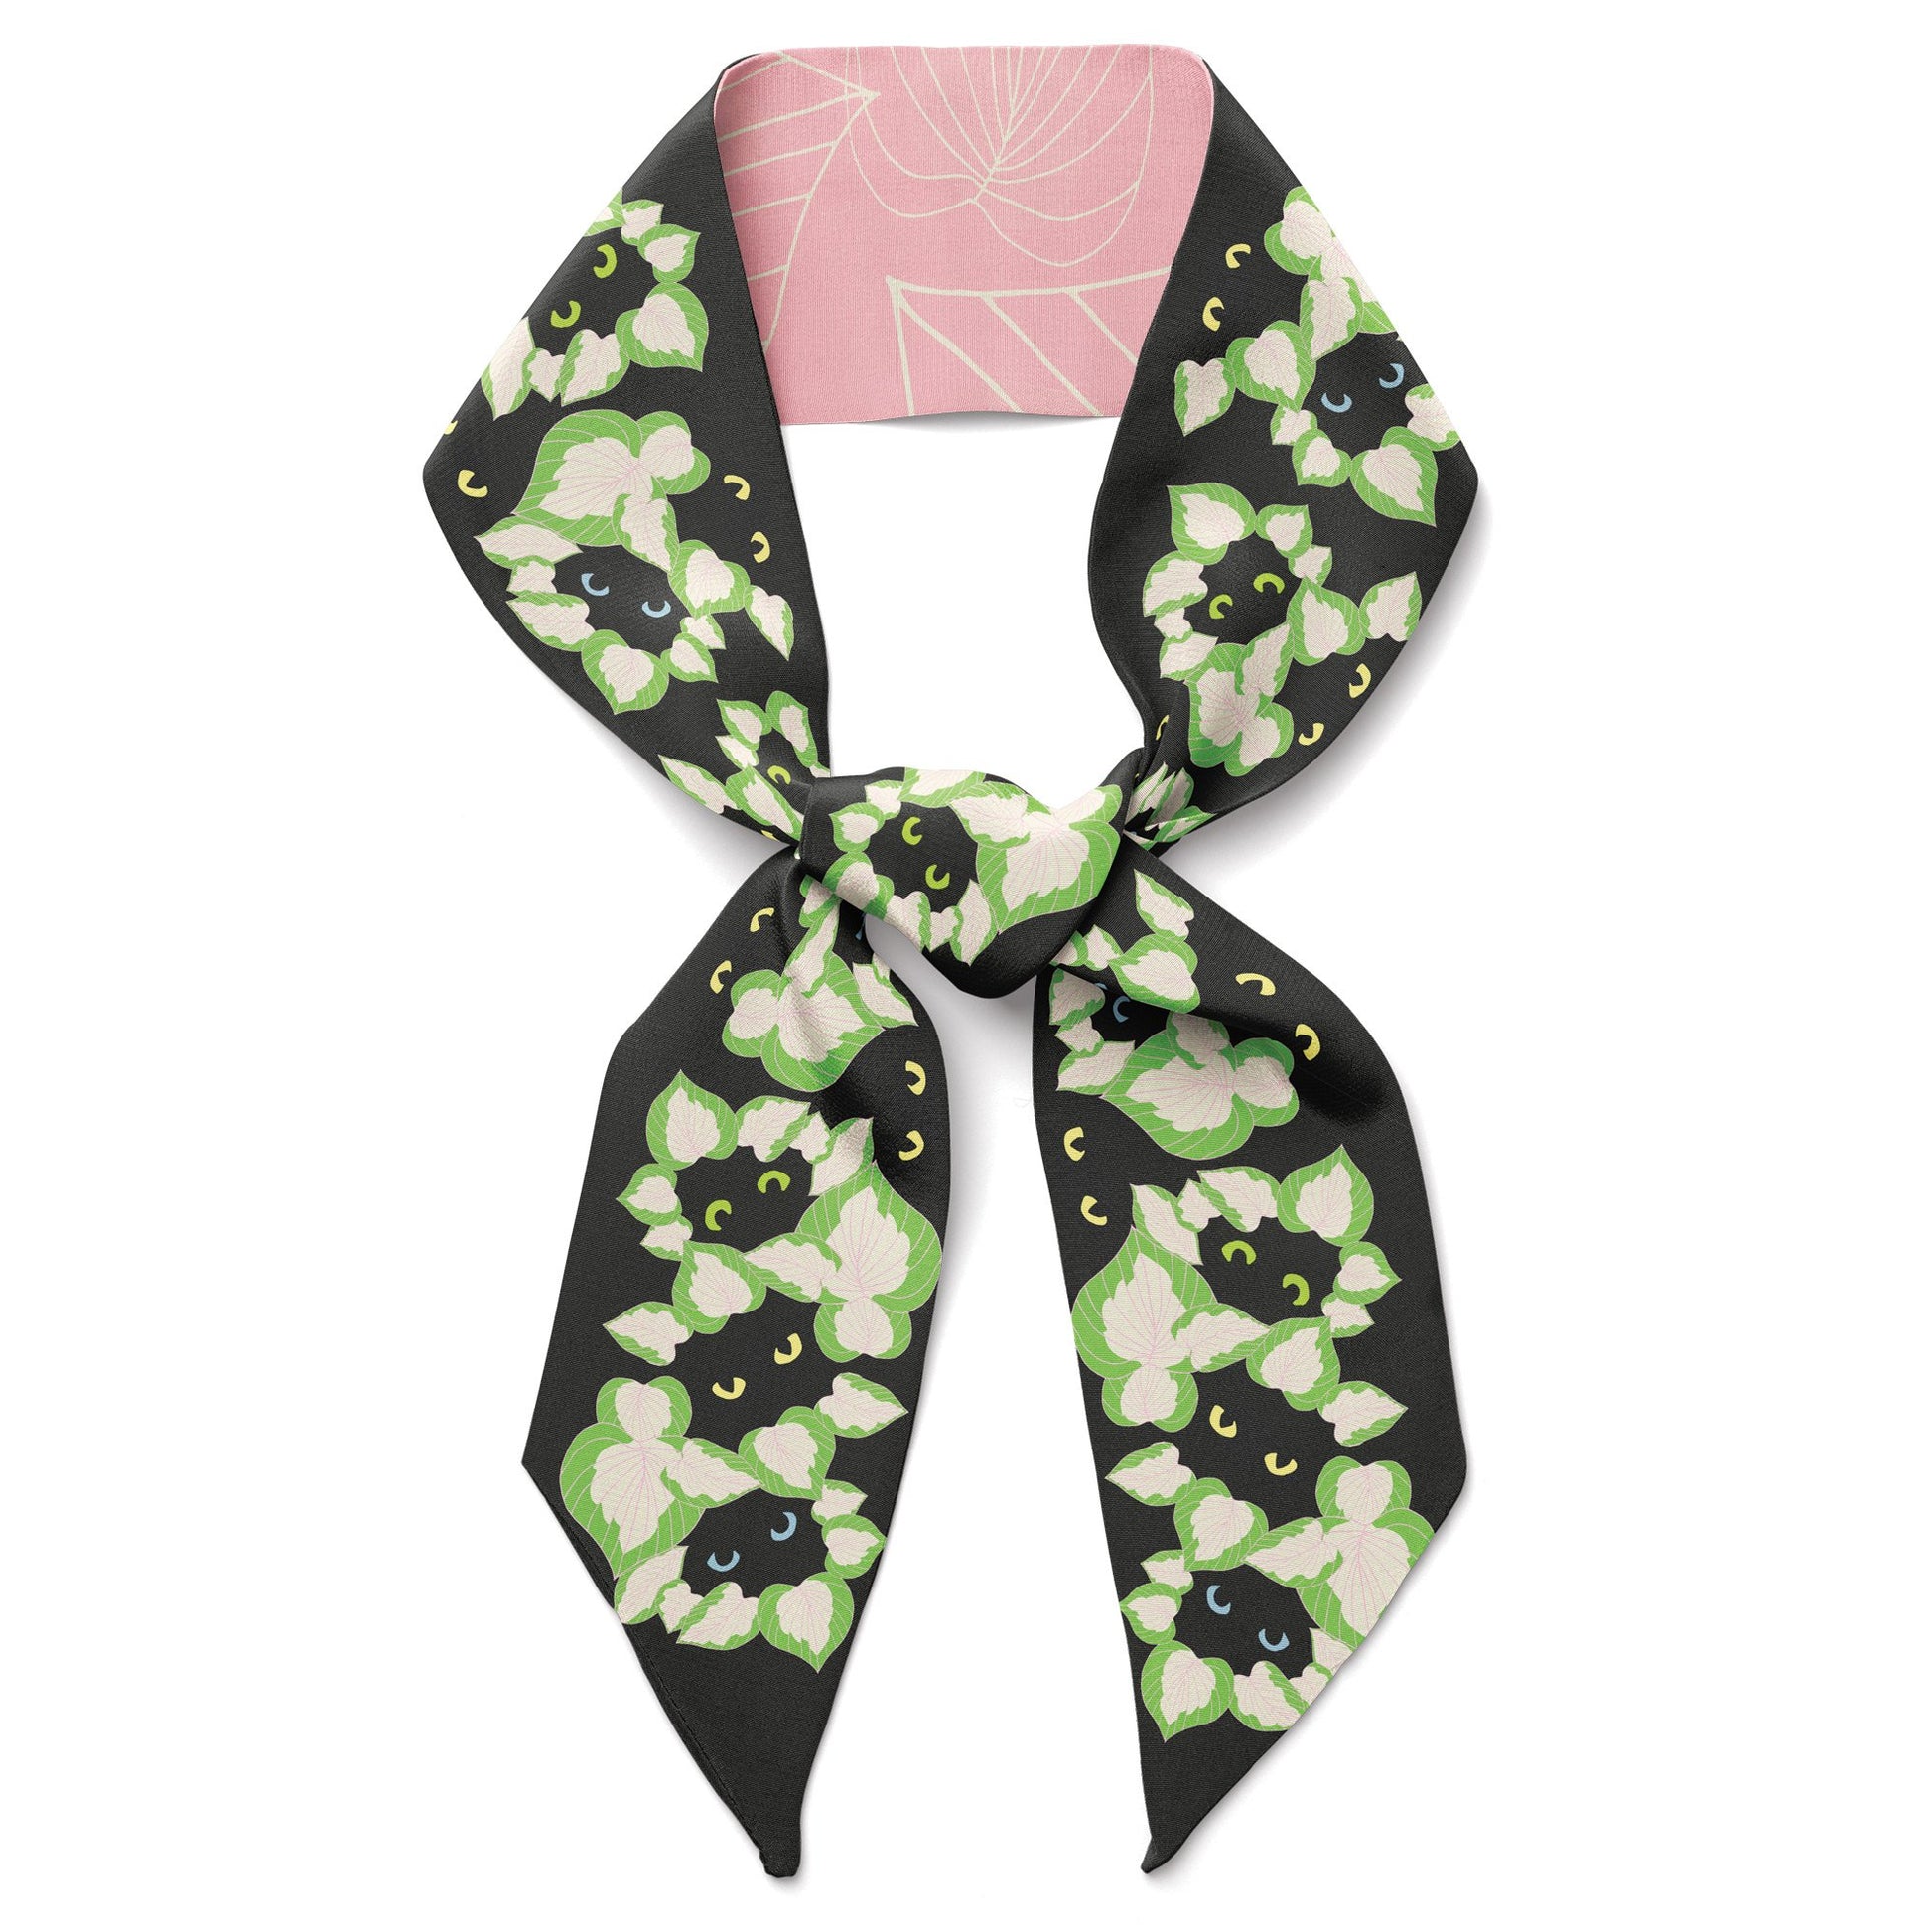 Silk twill scarf with black cats and and plants.